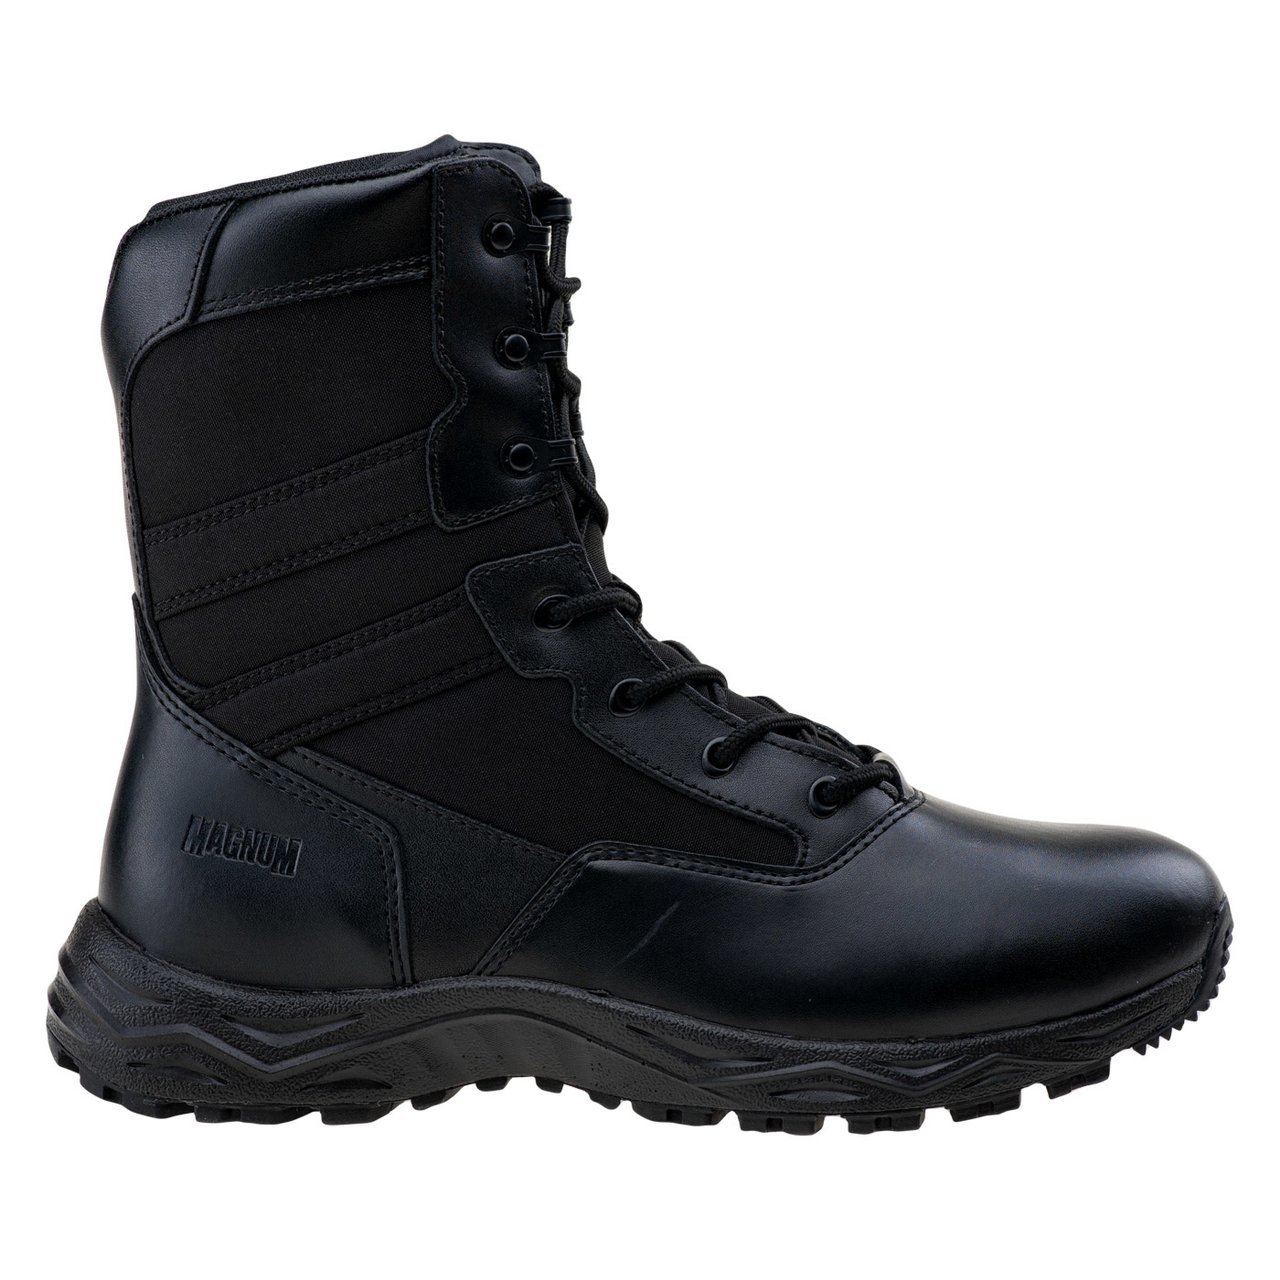 INTERCEPTOR MEN'S TACTICAL BOOTS - BLACK - MAGNUM | Footwear \ Boots \  Black  | Army Navy Surplus - Tactical | Big variety -  Cheap prices | Military Surplus, Clothing, Law Enforcement, Boots, Outdoor  & Tactical Gear